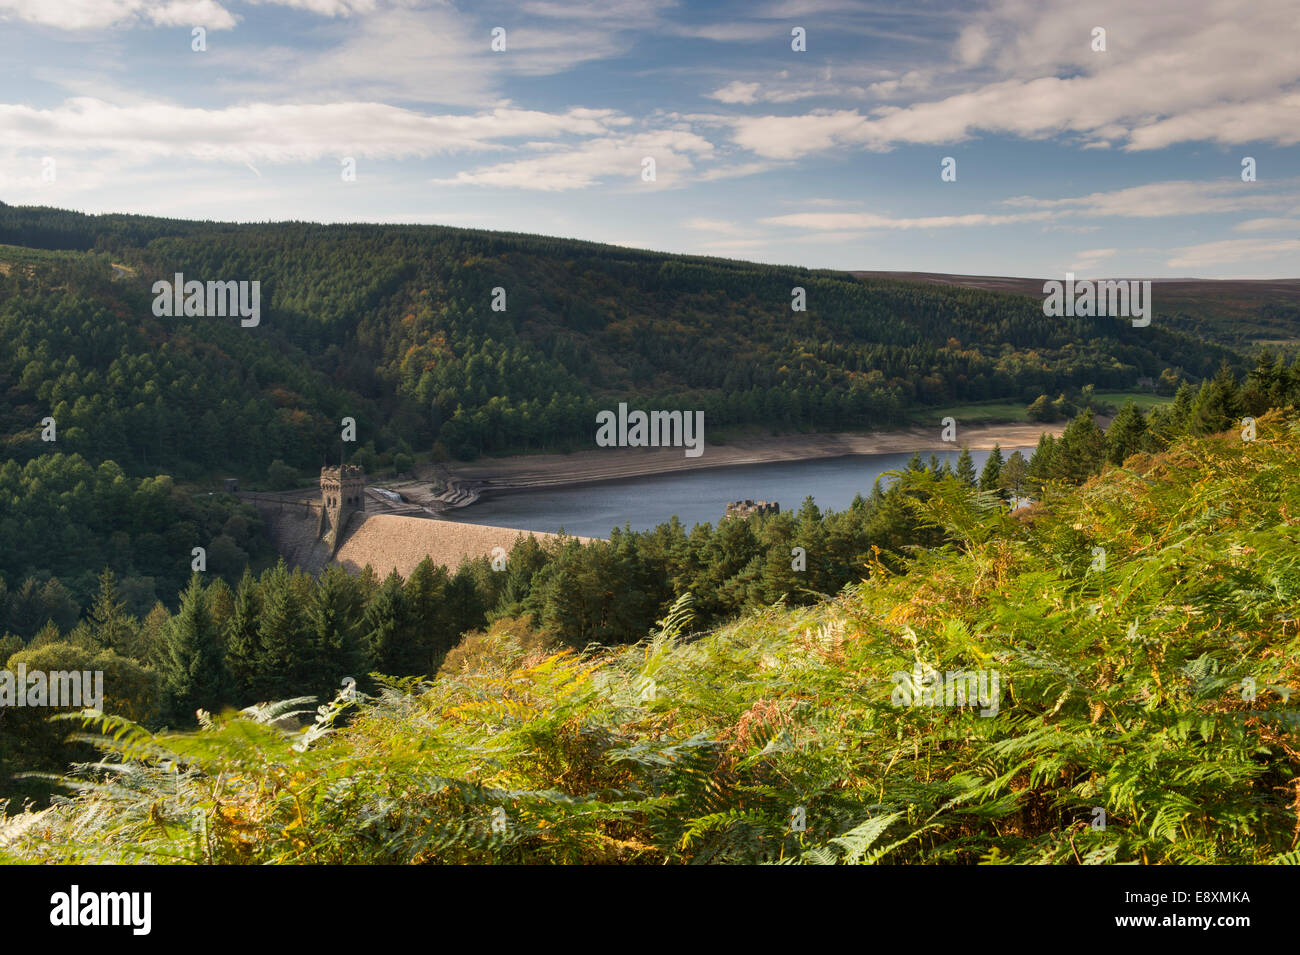 High view over picturesque man-made lake (Derwent Reservoir), dam & trees on wooded hillside slopes on a sunny day - Peak District, Derbyshire, UK. Stock Photo